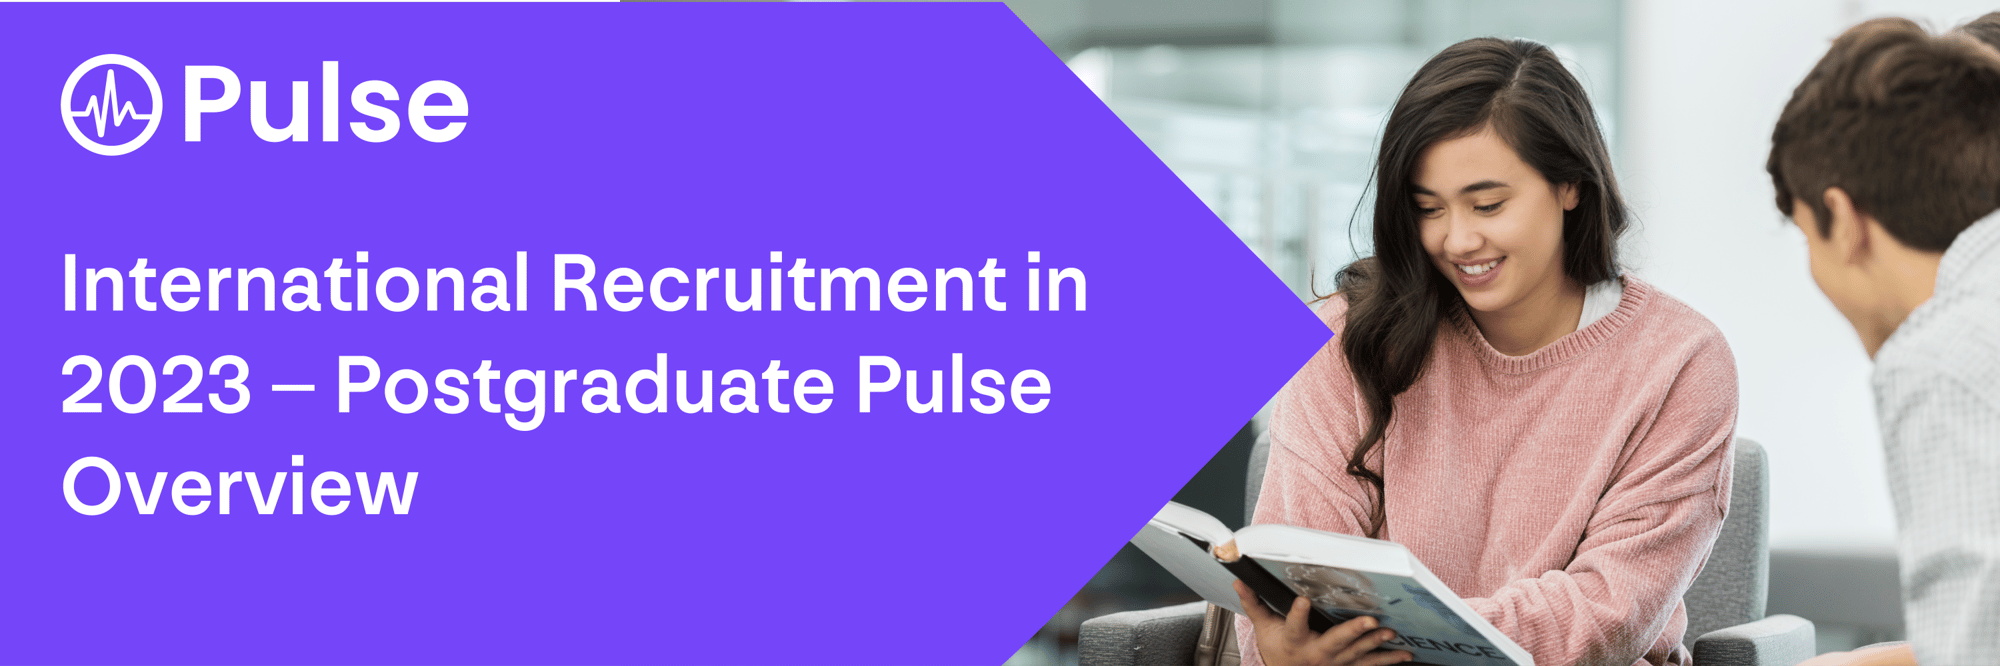 International Recruitment in 2023 - Postgraduate Pulse Overview. A female student holding a book